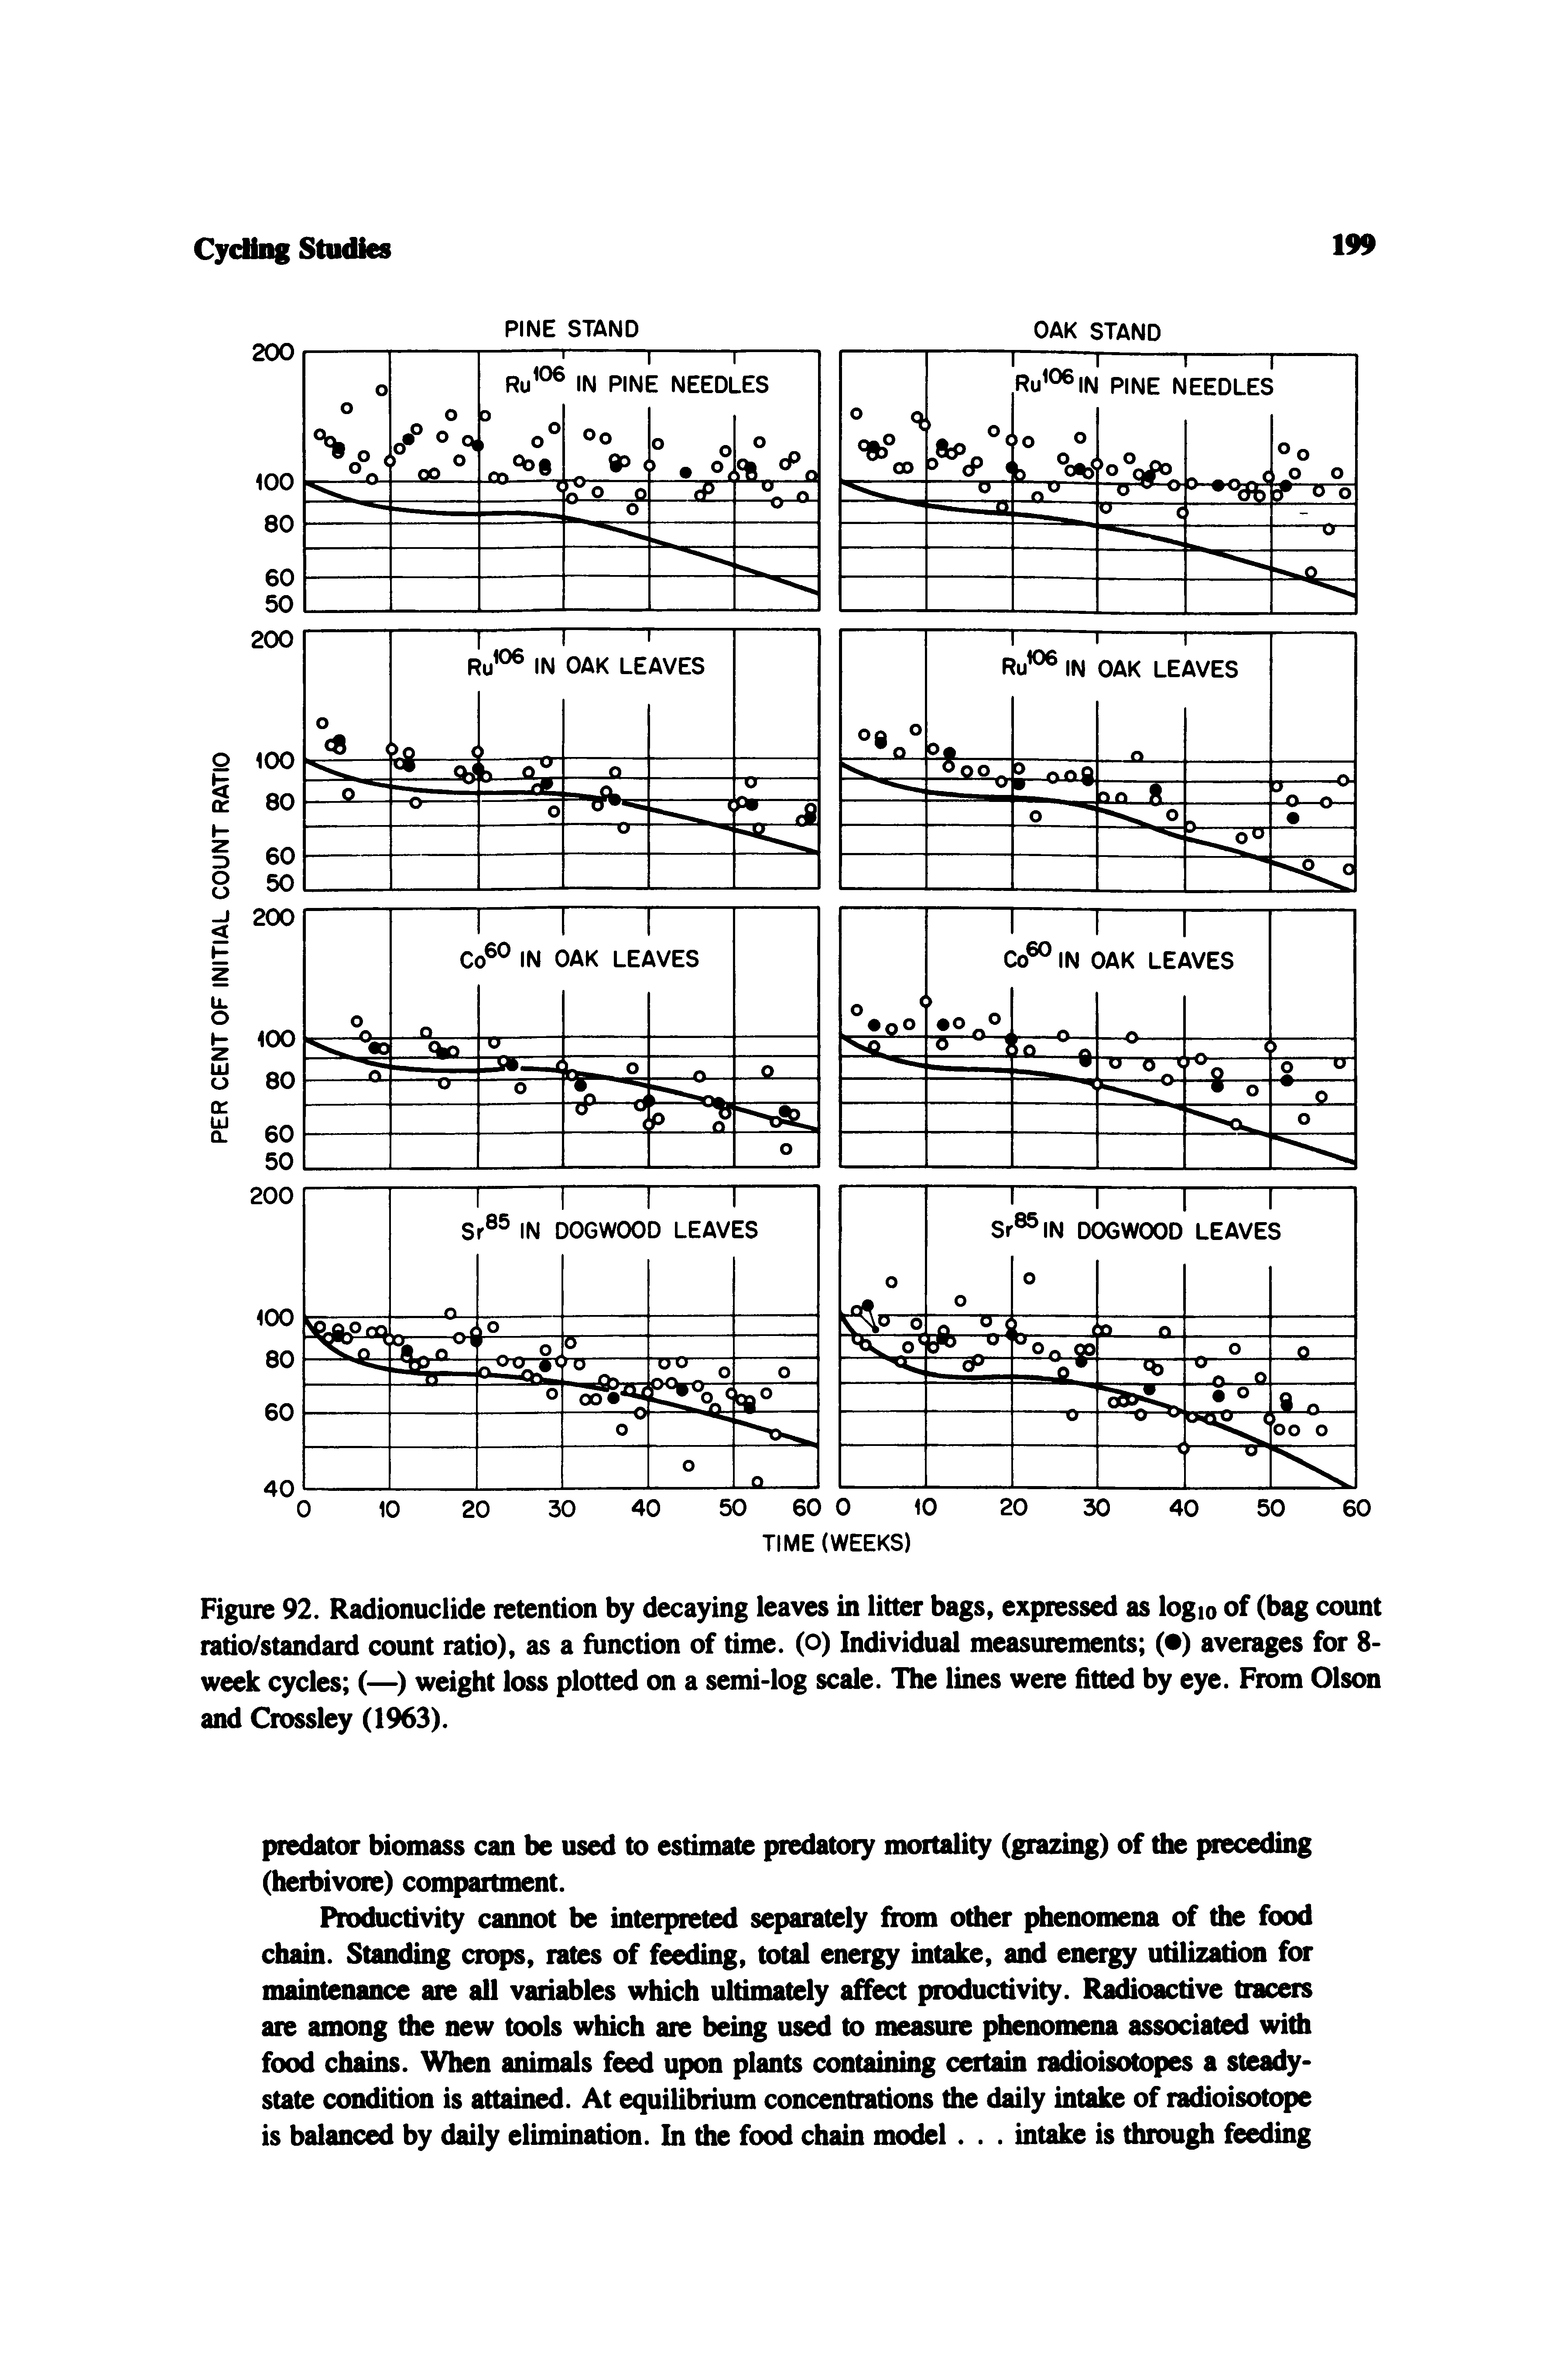 Figure 92. Radionuclide retention by decaying leaves in litter bags, expressed as logio of (bag count ratio/standard count ratio), as a function of time, (o) Individual measurements ( ) averages for 8-week cycles (—) weight loss plotted on a semi-log scale. The lines were fitted by eye. From Olson and Crossley (1963).